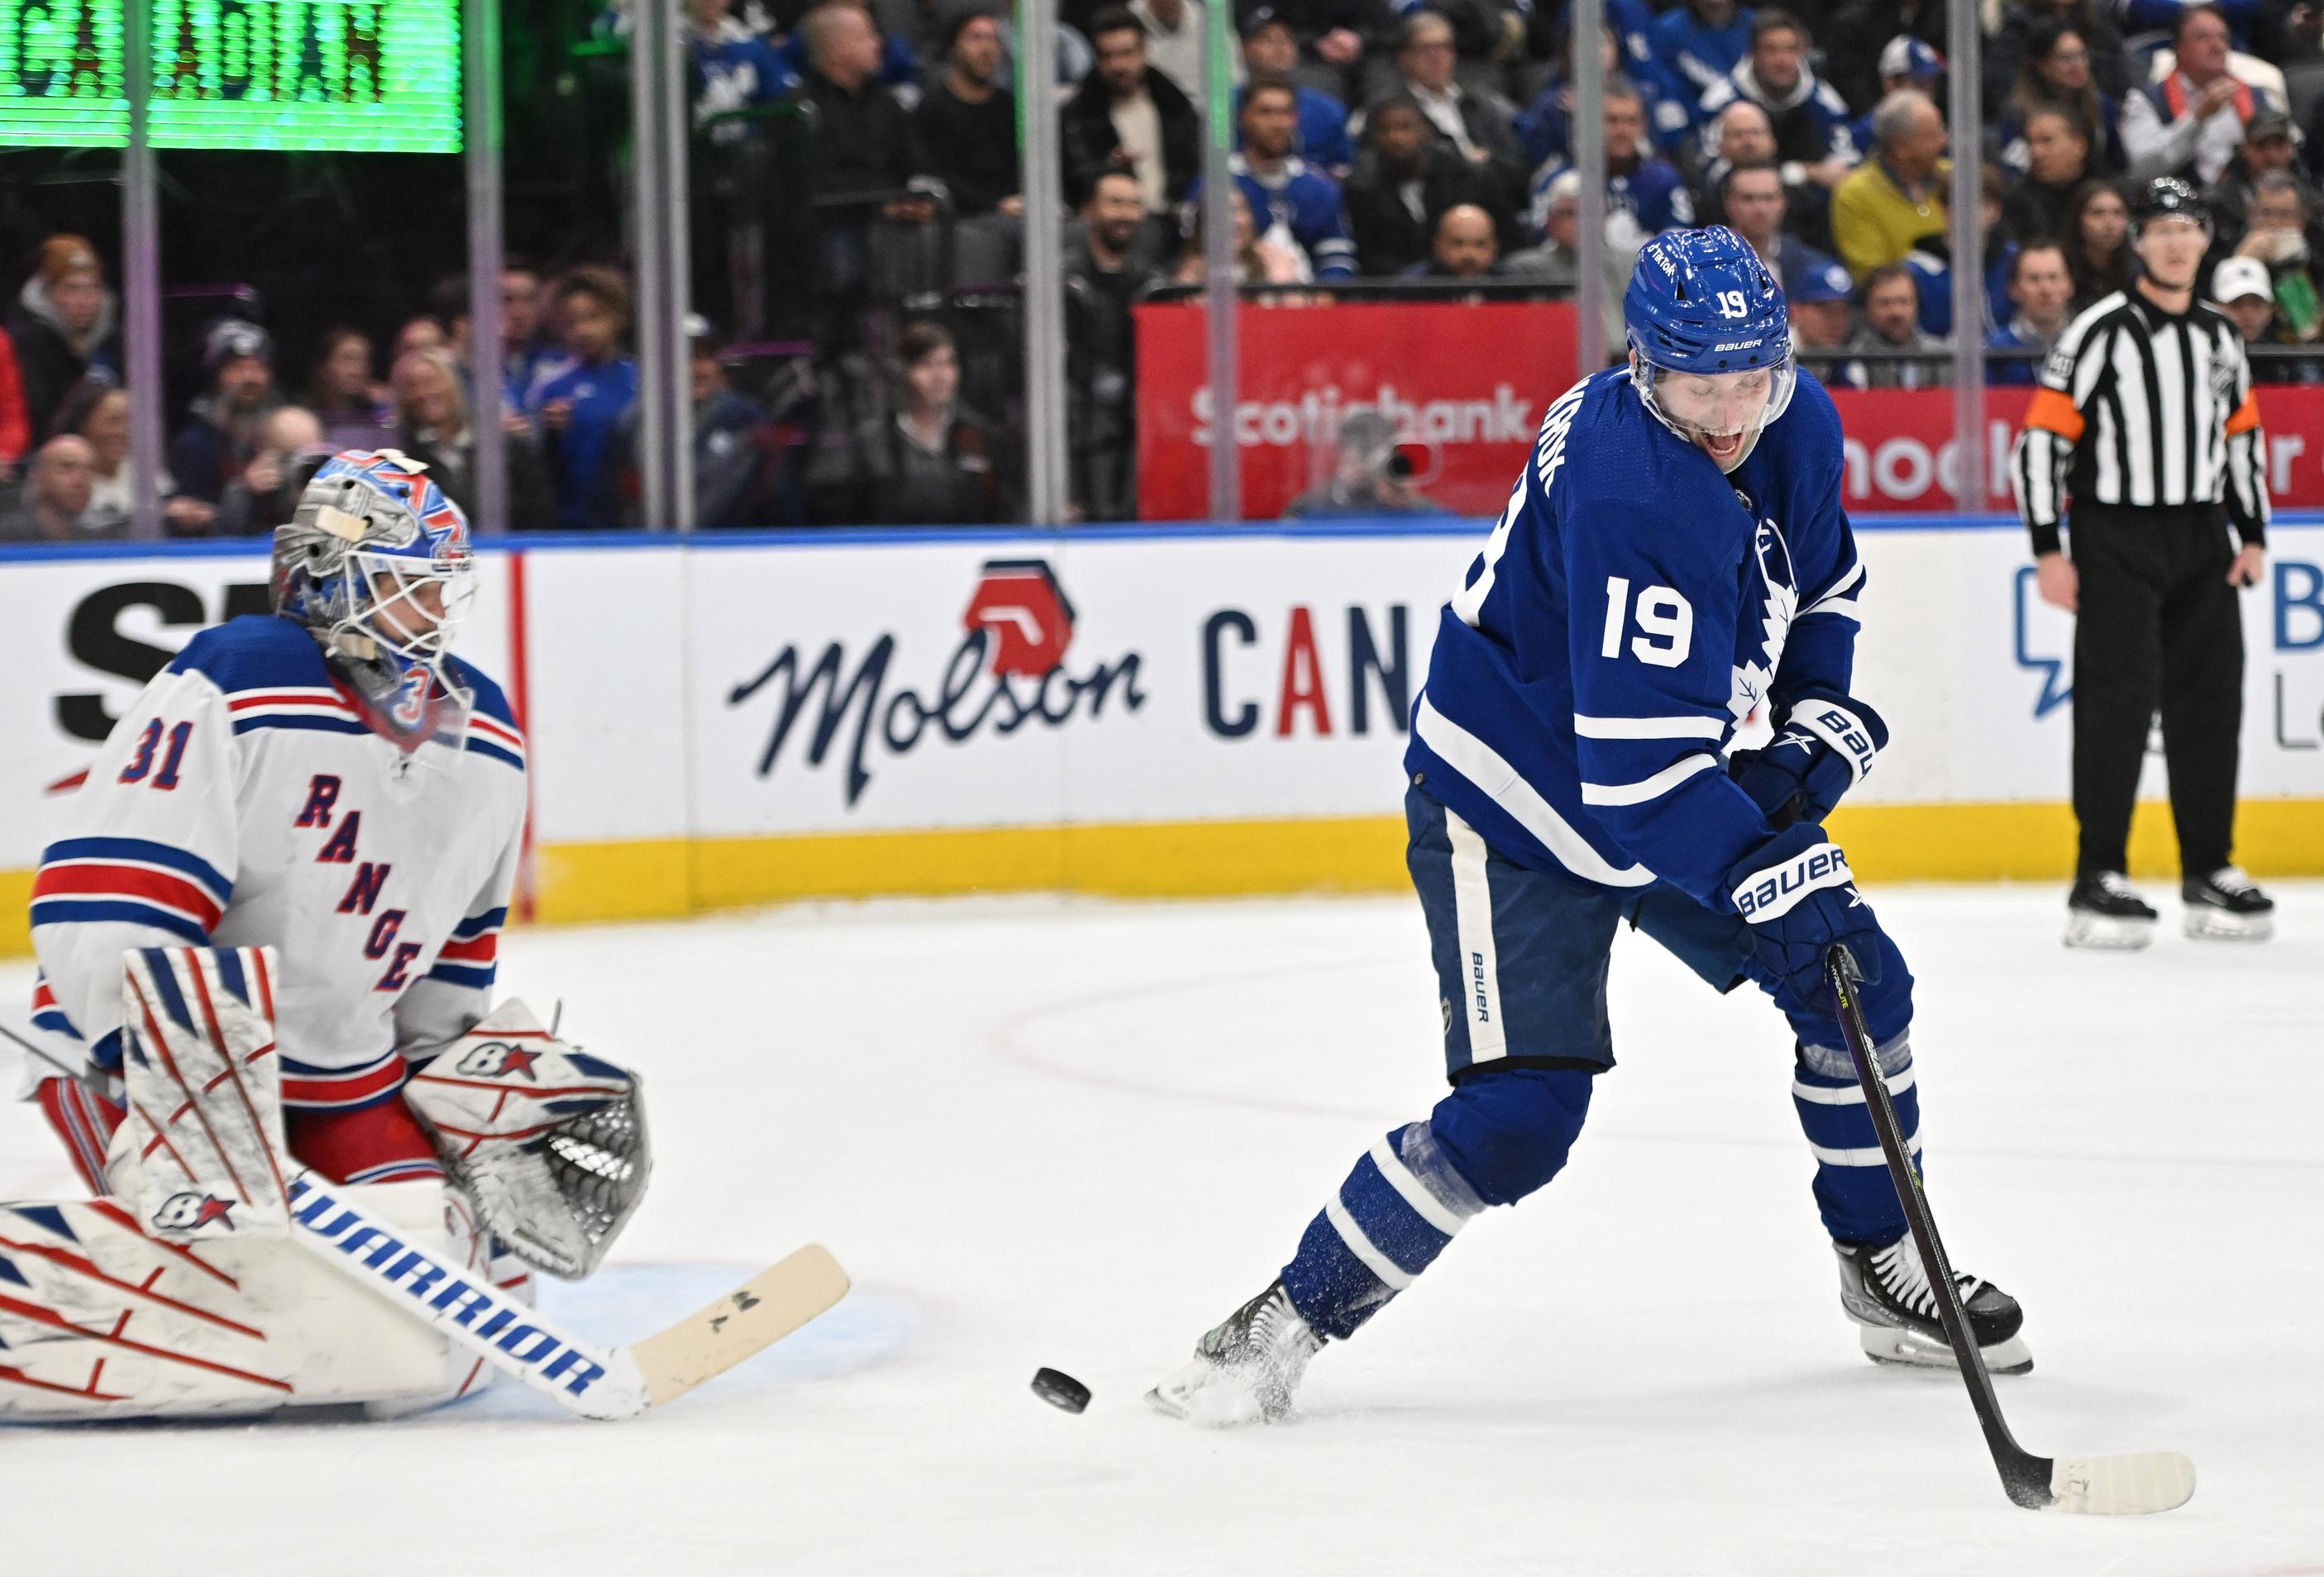 Toronto Maple Leafs forward Calle Jarnkrok (19) deflects the puck in front of New York Rangers goalie Igor Shesterkin (31) in the first period at Scotiabank Arena. / Dan Hamilton-USA TODAY Sports